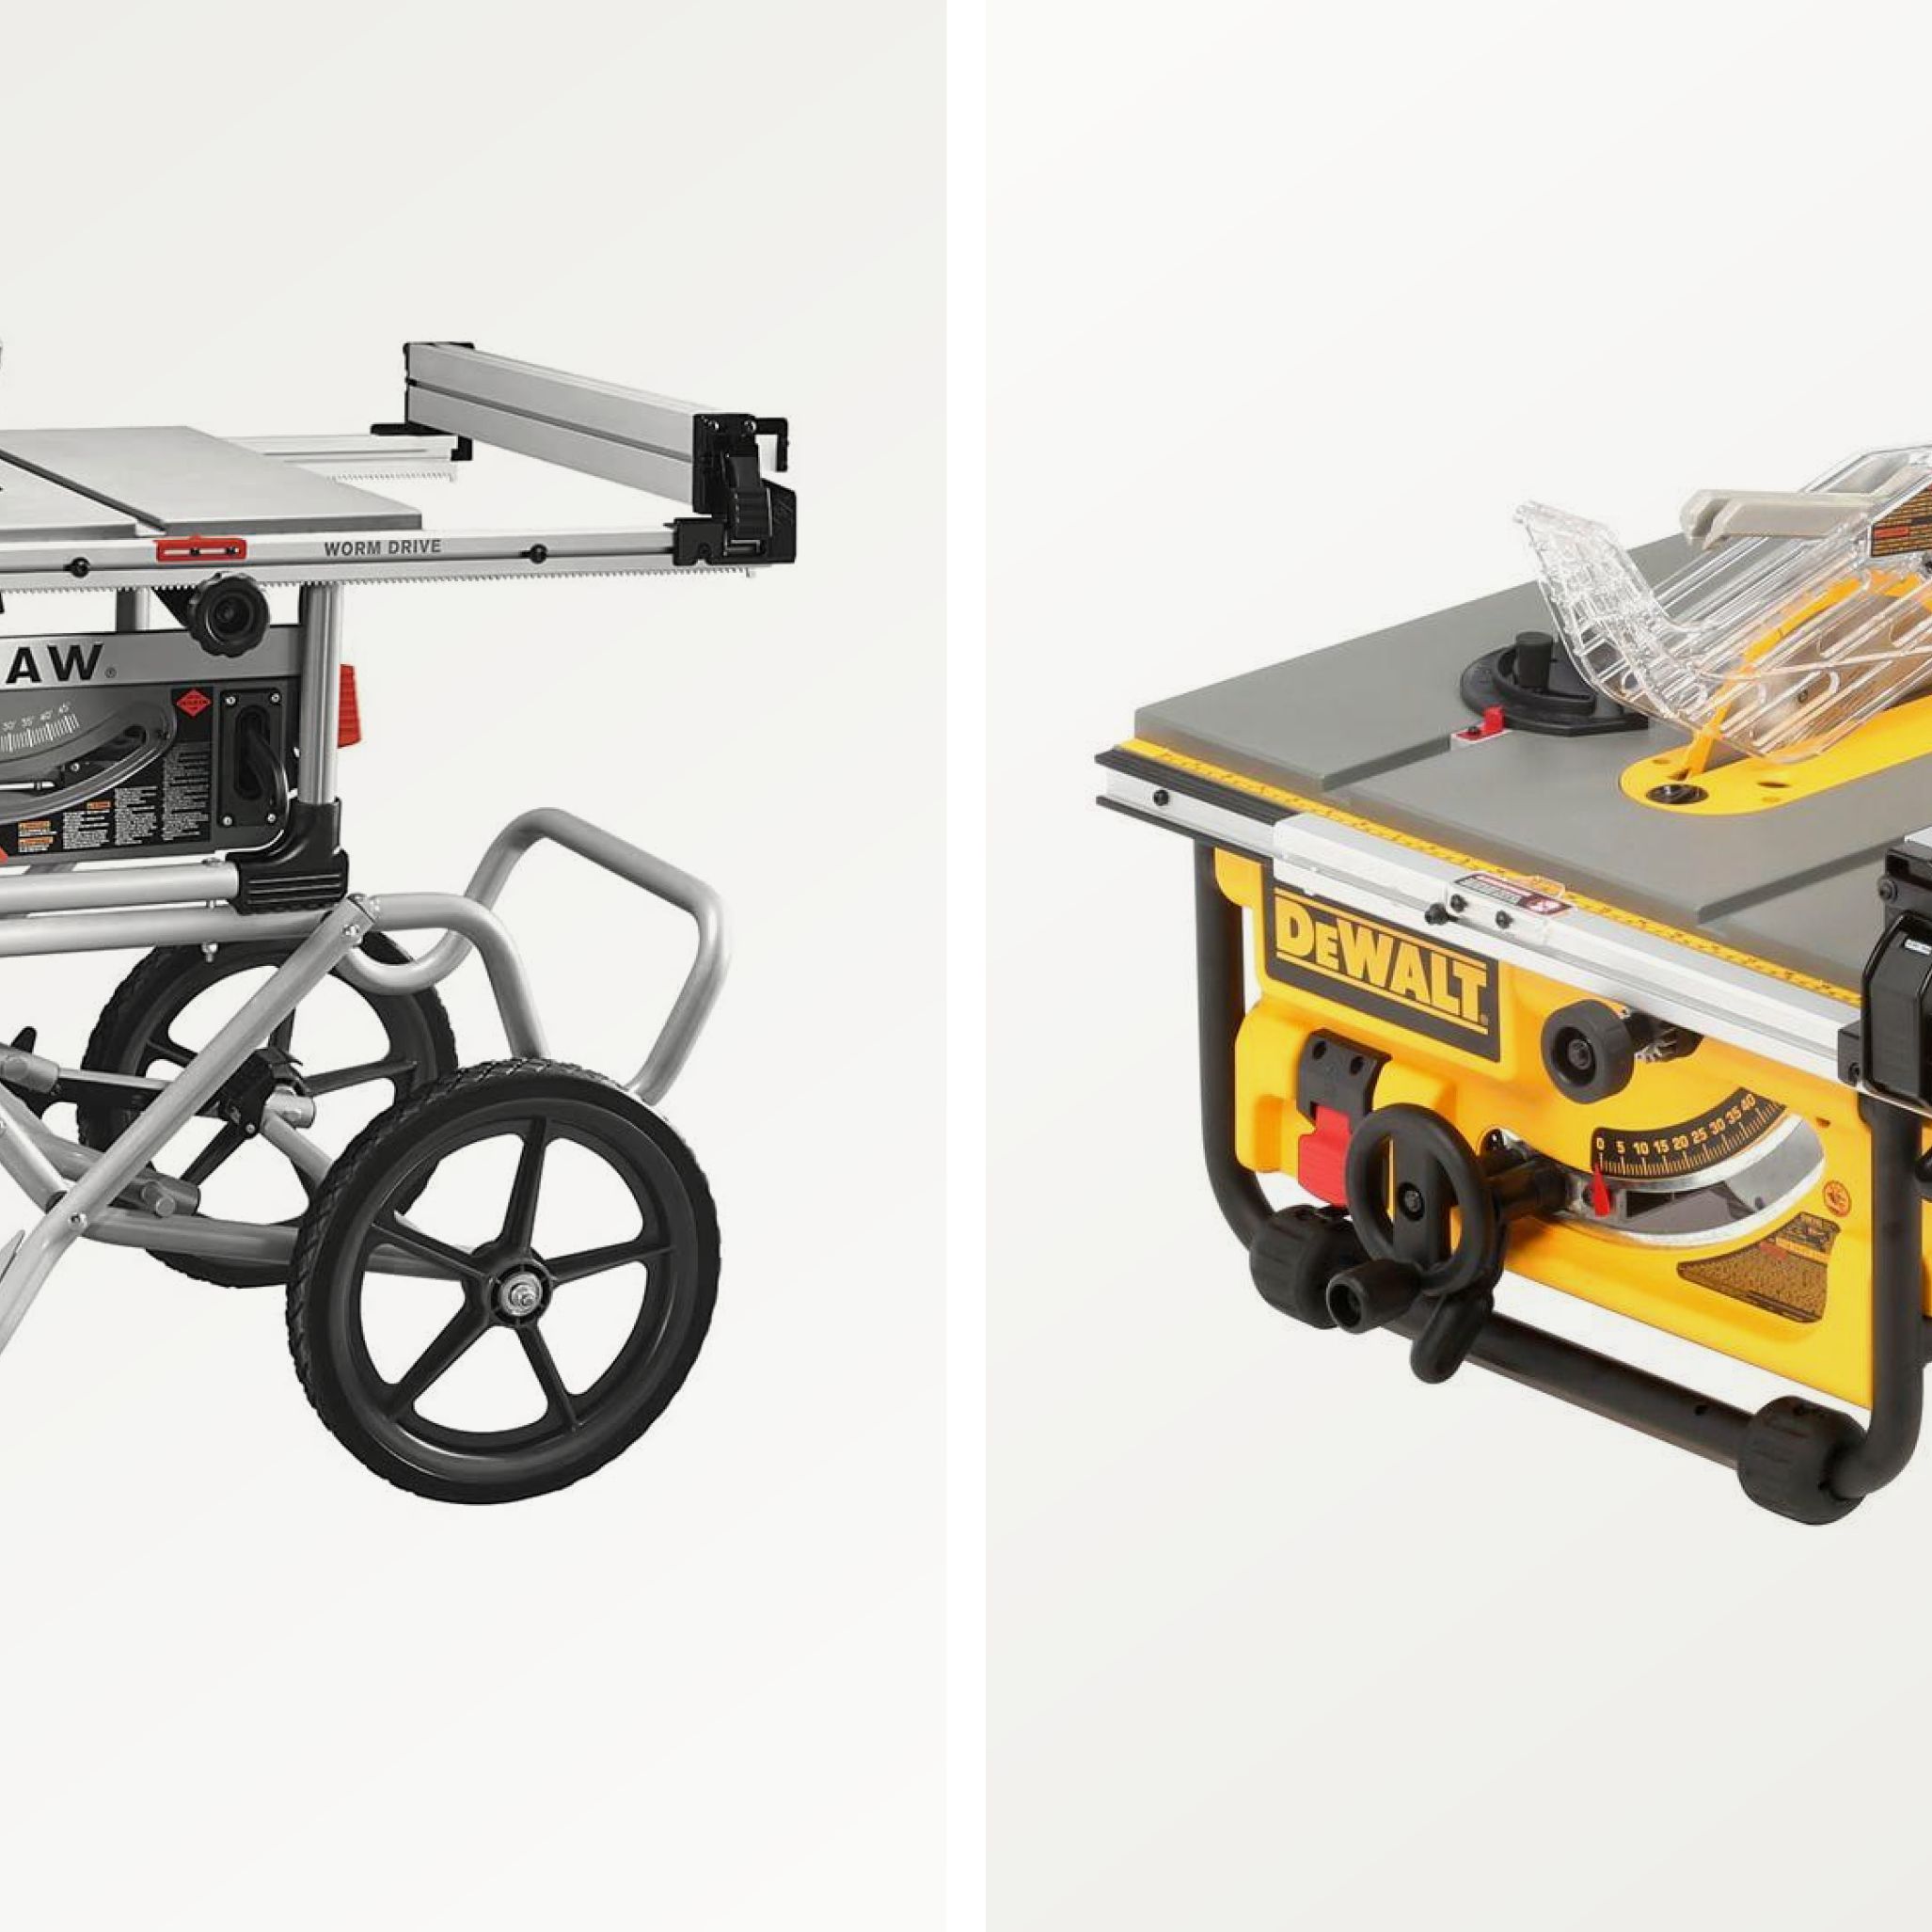 The Best Portable Table Saws